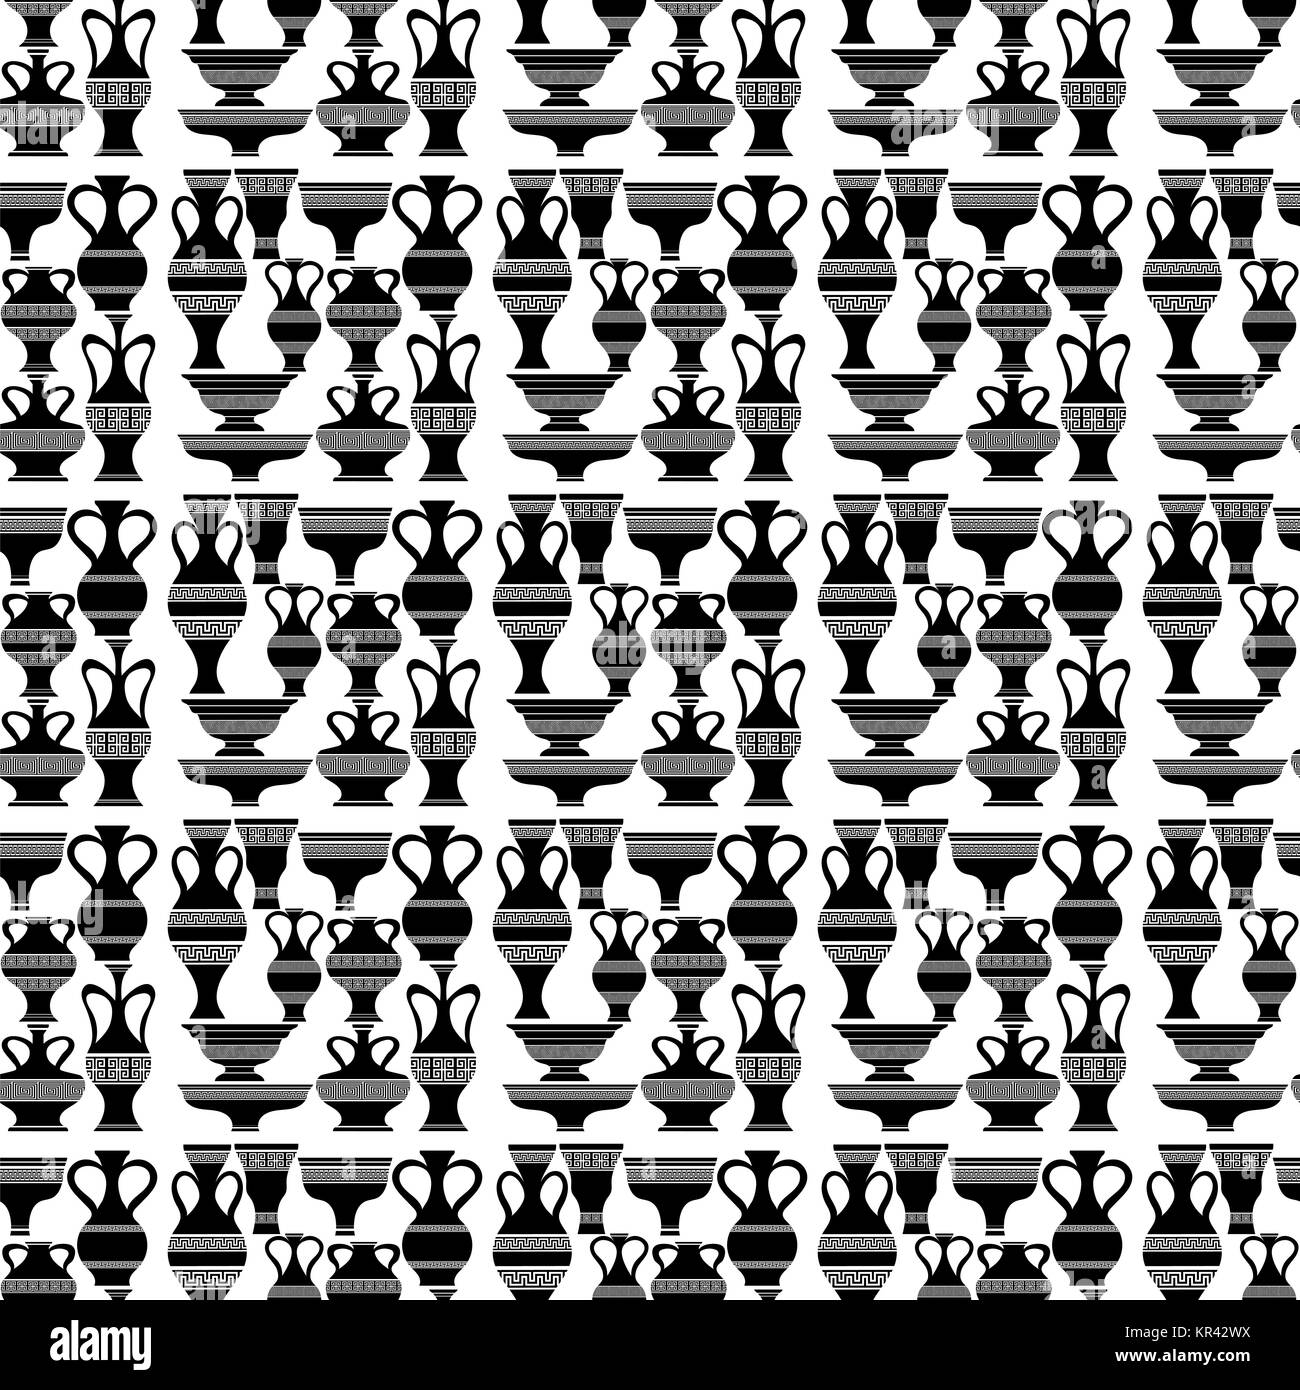 Different Vases. Seamless of Amphora Pattern. Stock Photo